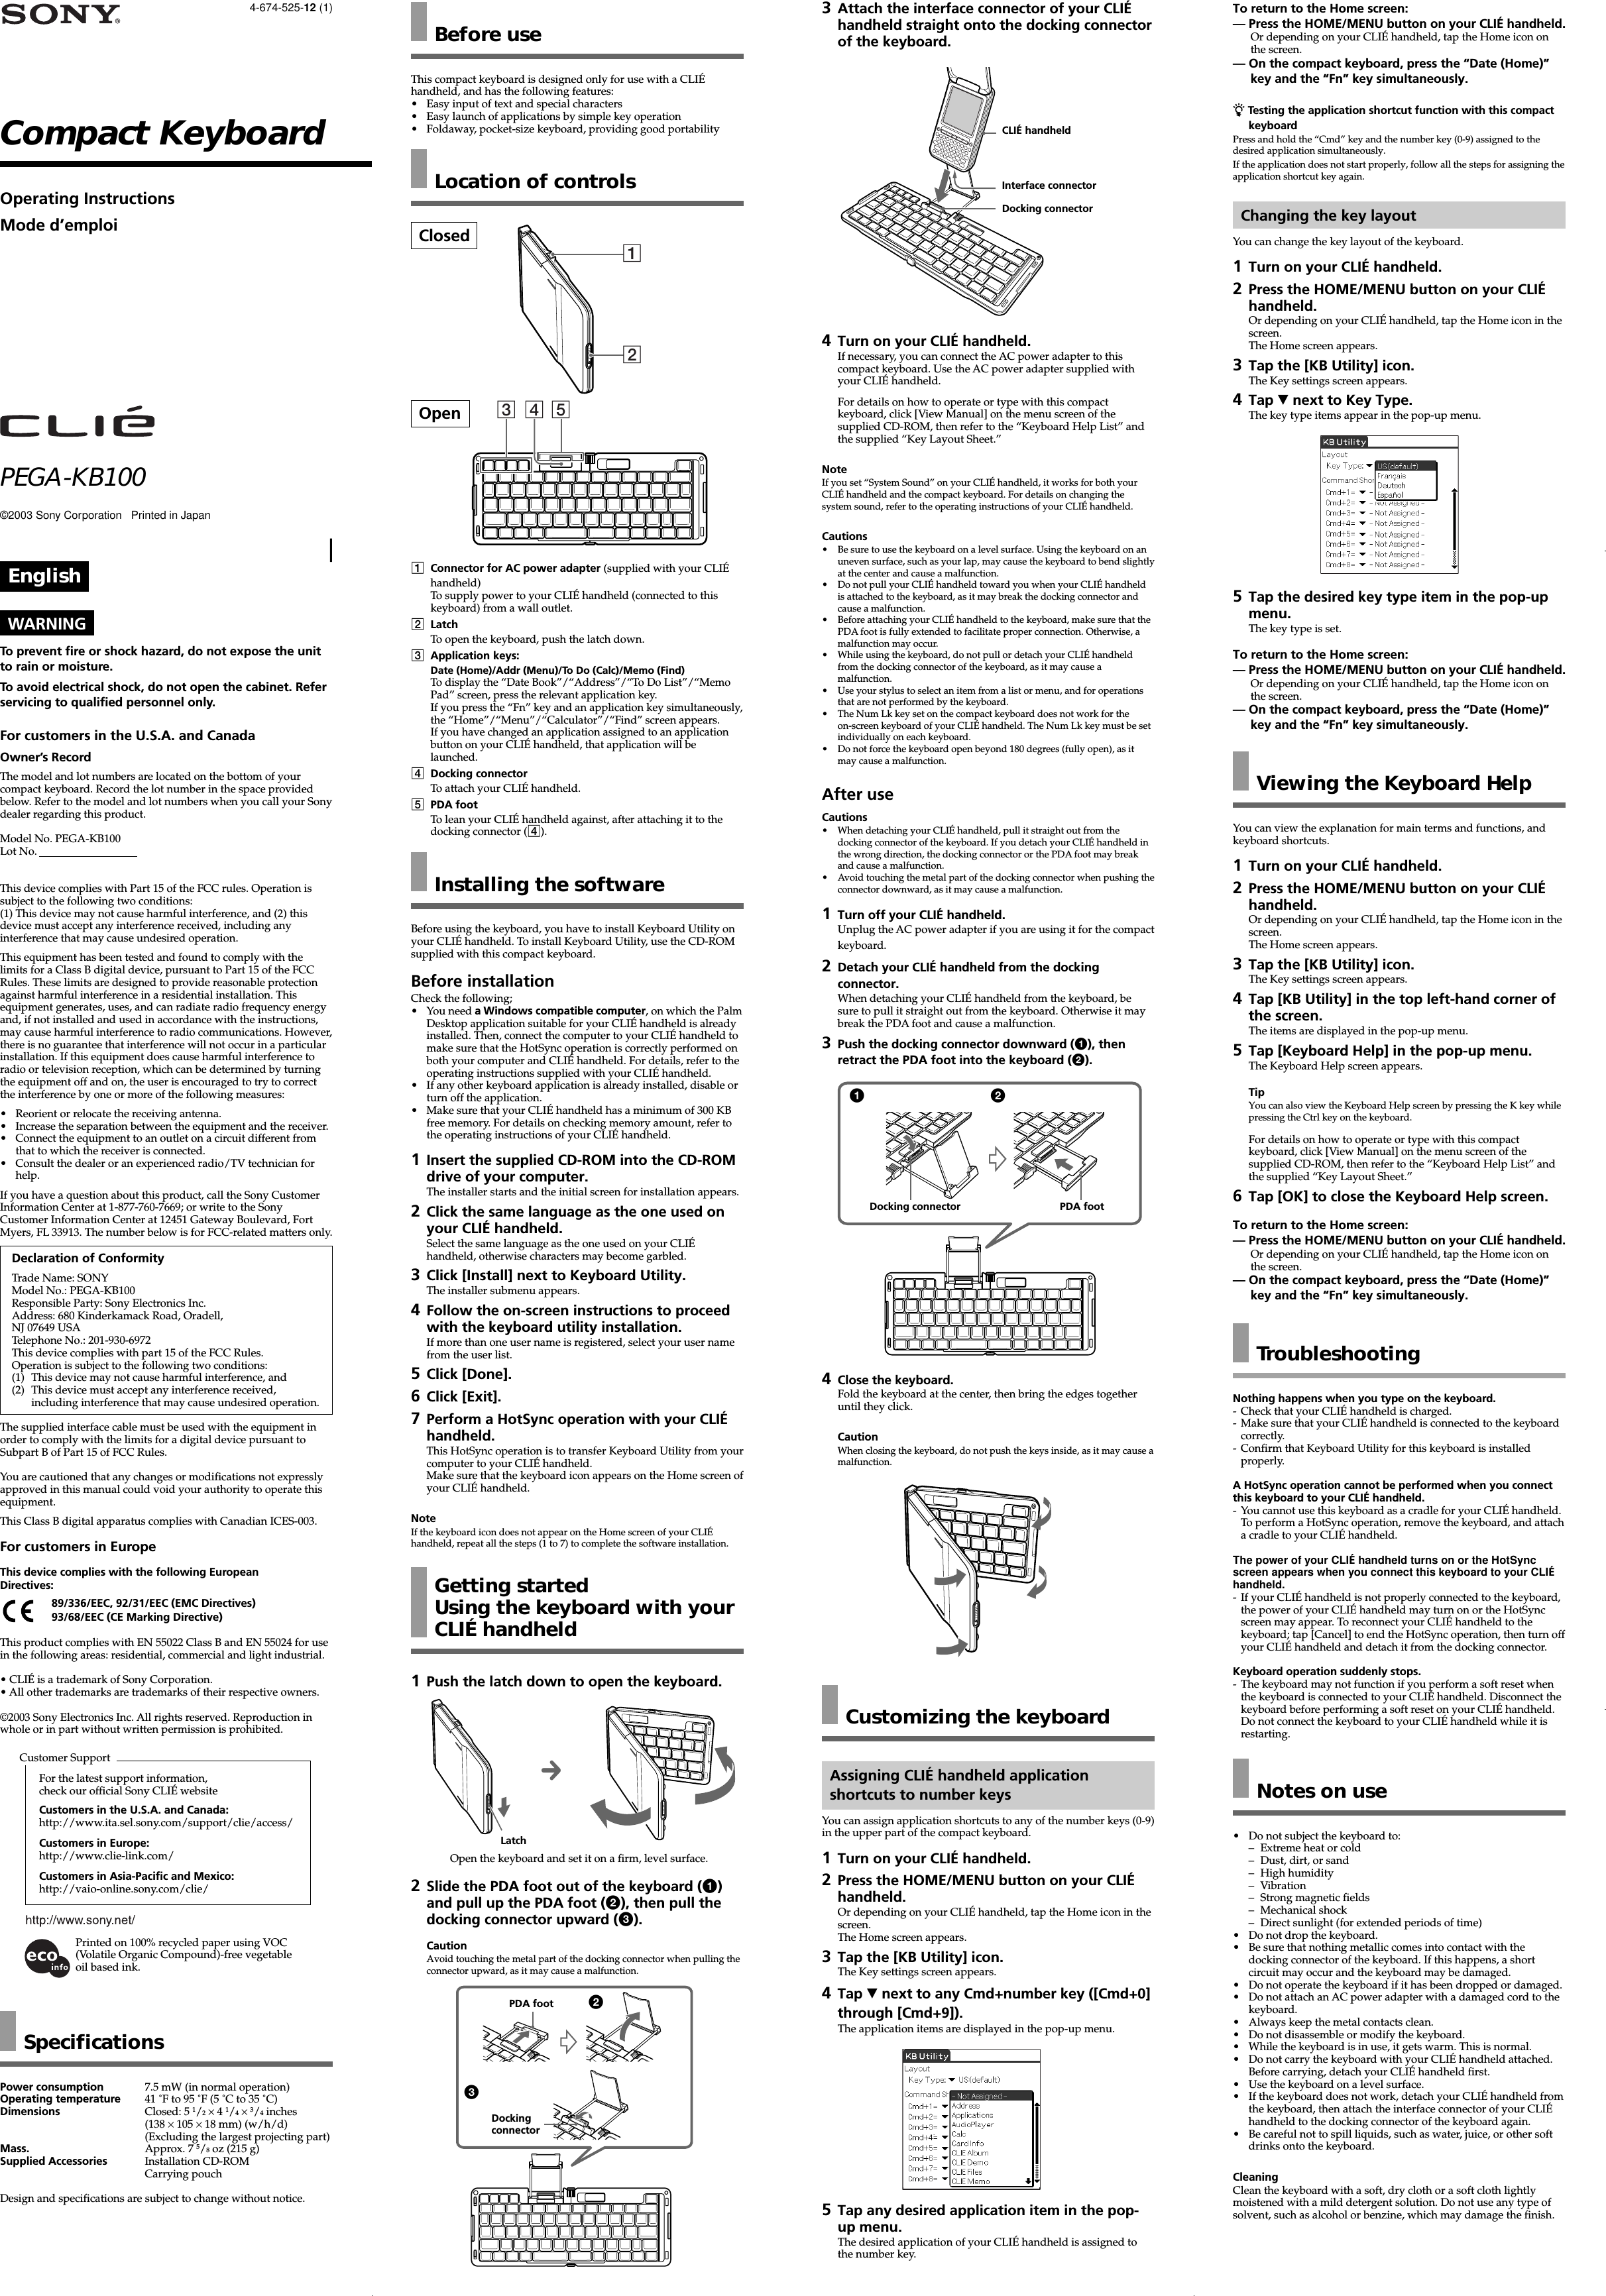 Page 1 of 2 - Sony PEGA-KB100 User Manual Operating Instructions PEGAKB100